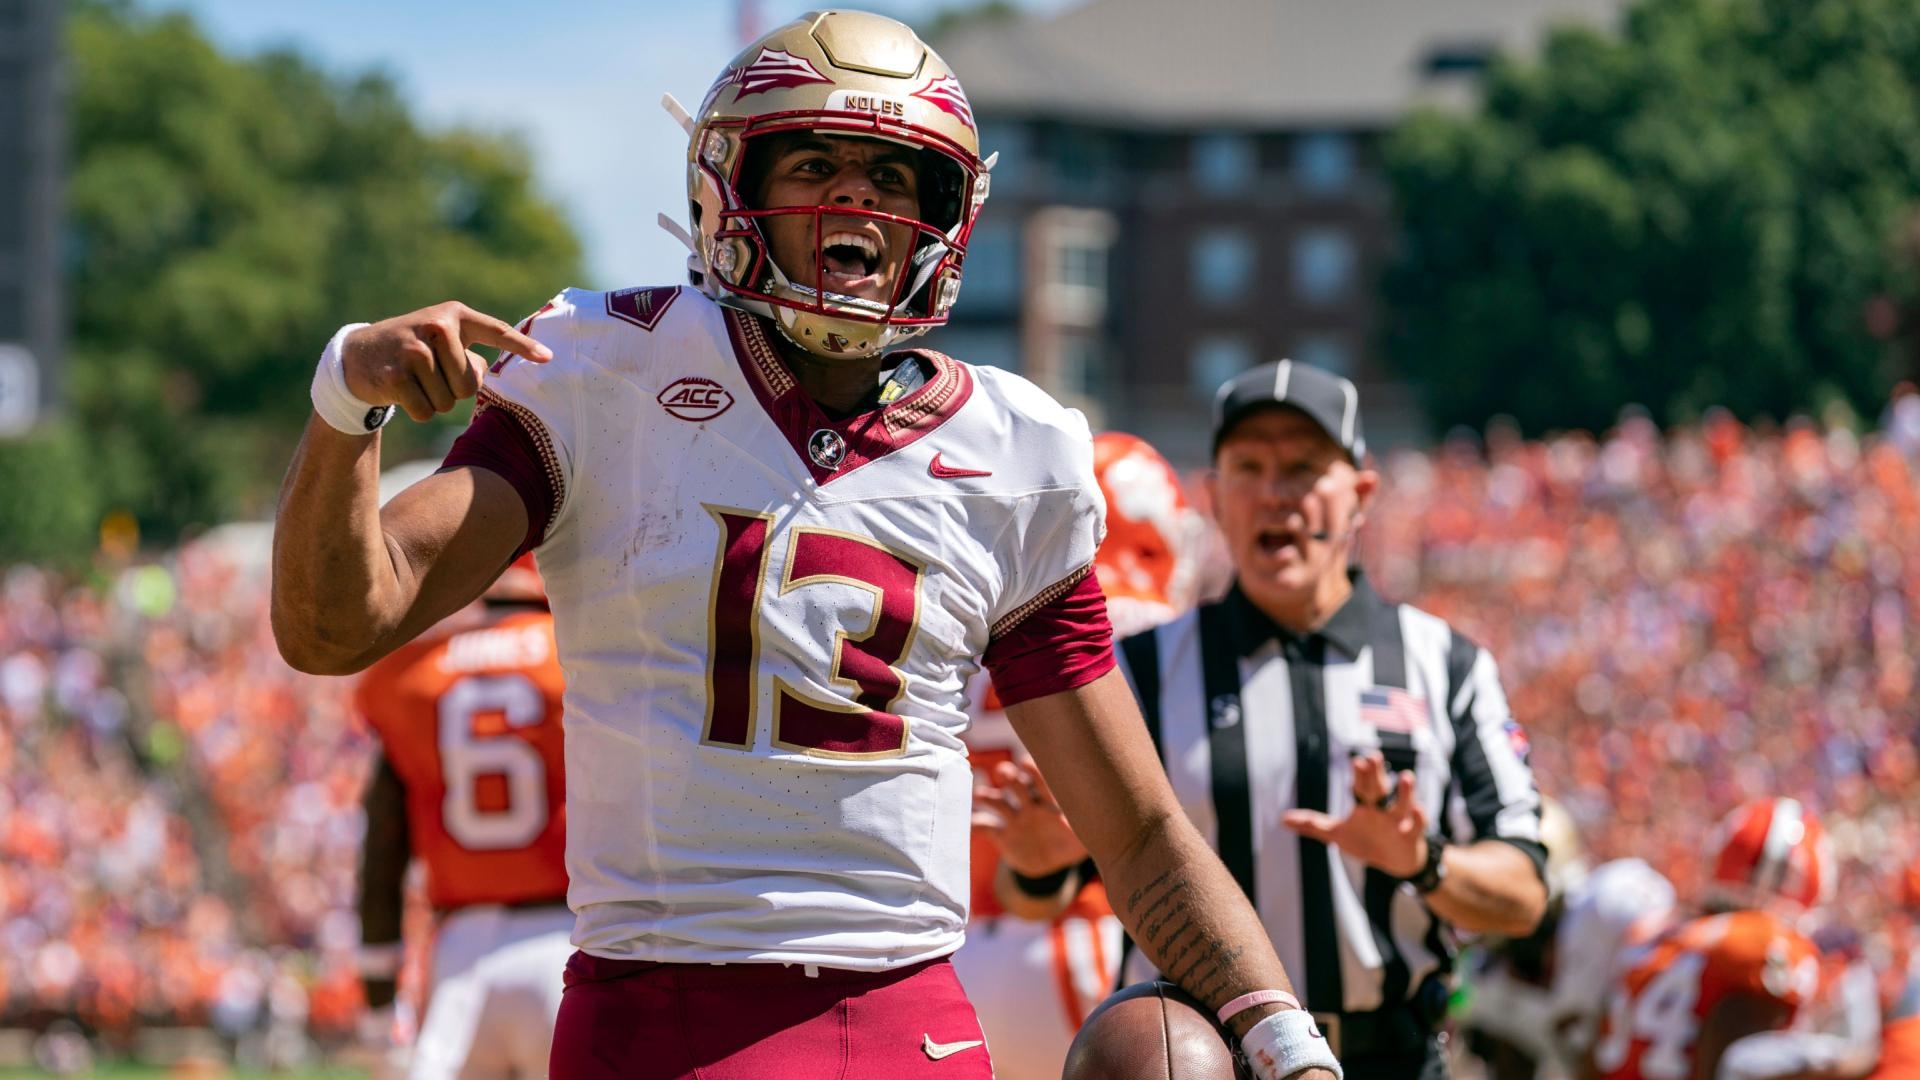 Florida State survives Clemson in OT to remain undefeated